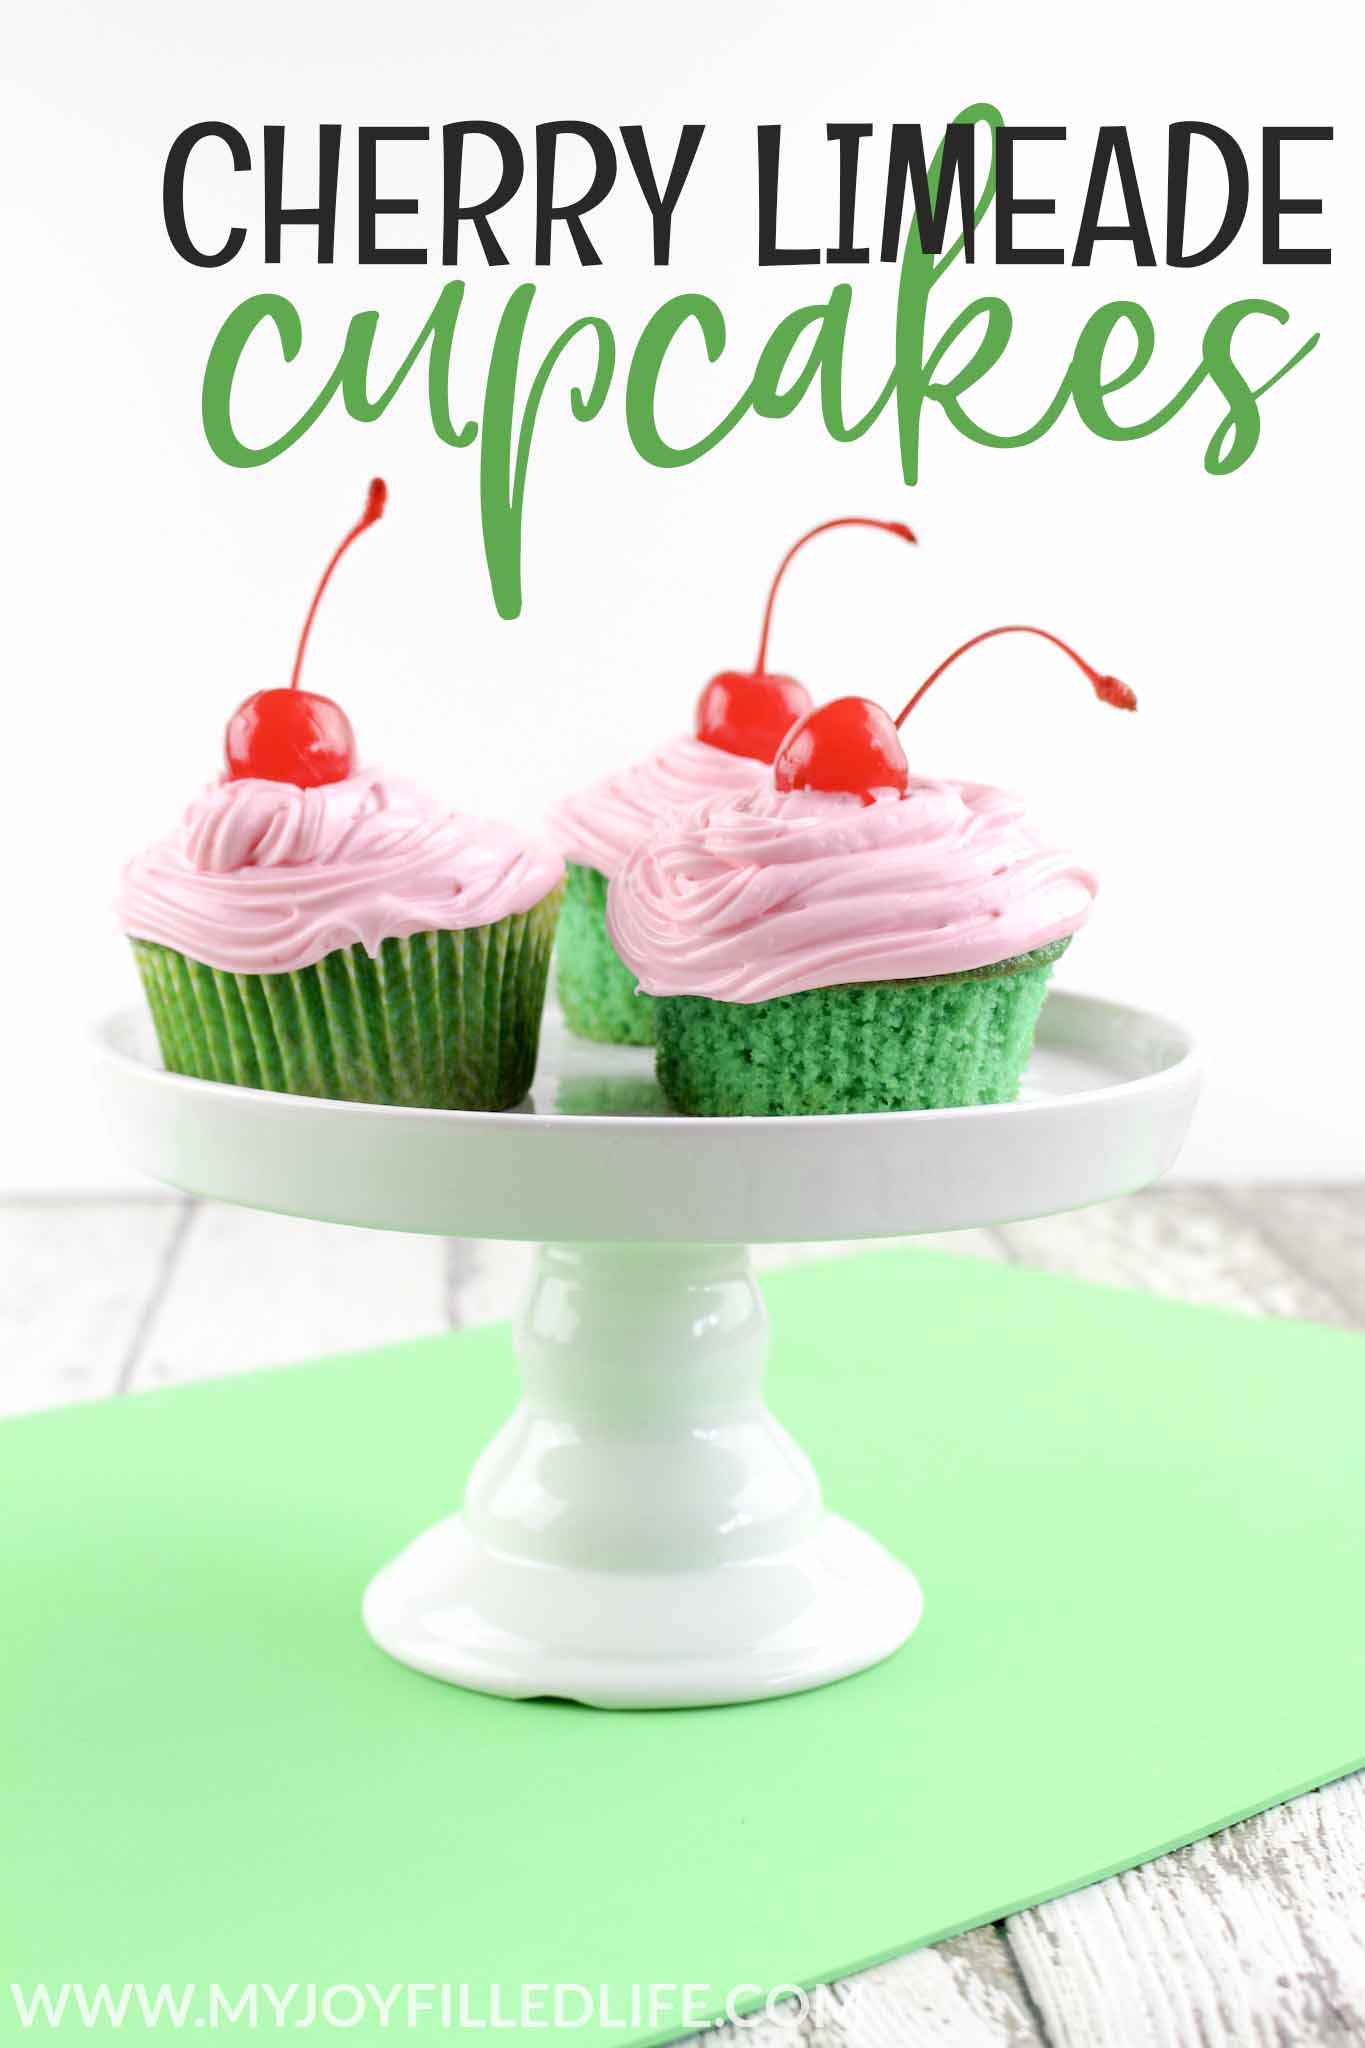 These cherry limeade cupcakes are the PERFECT cupcake recipe for summer! They are so moist and delicious - you'll have everyone begging for more. Follow these easy step by step directions below to make your own cherry limeade cupcakes. #cupcakes #cherrylimeade